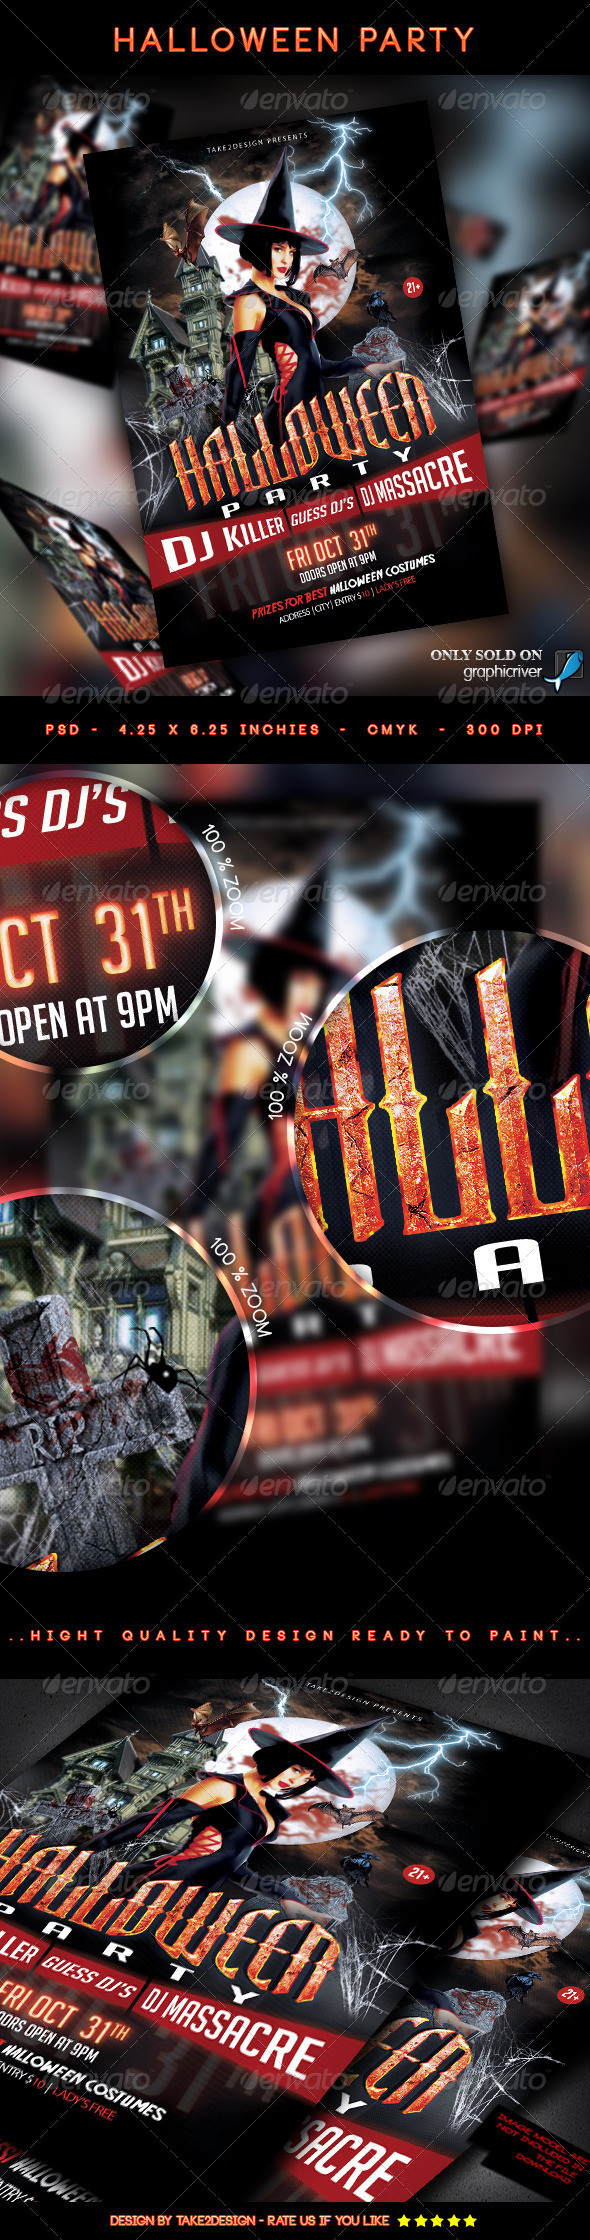 Preview 20  20halloween 20party 20flyer 20template 20 design 20by 20take2design 